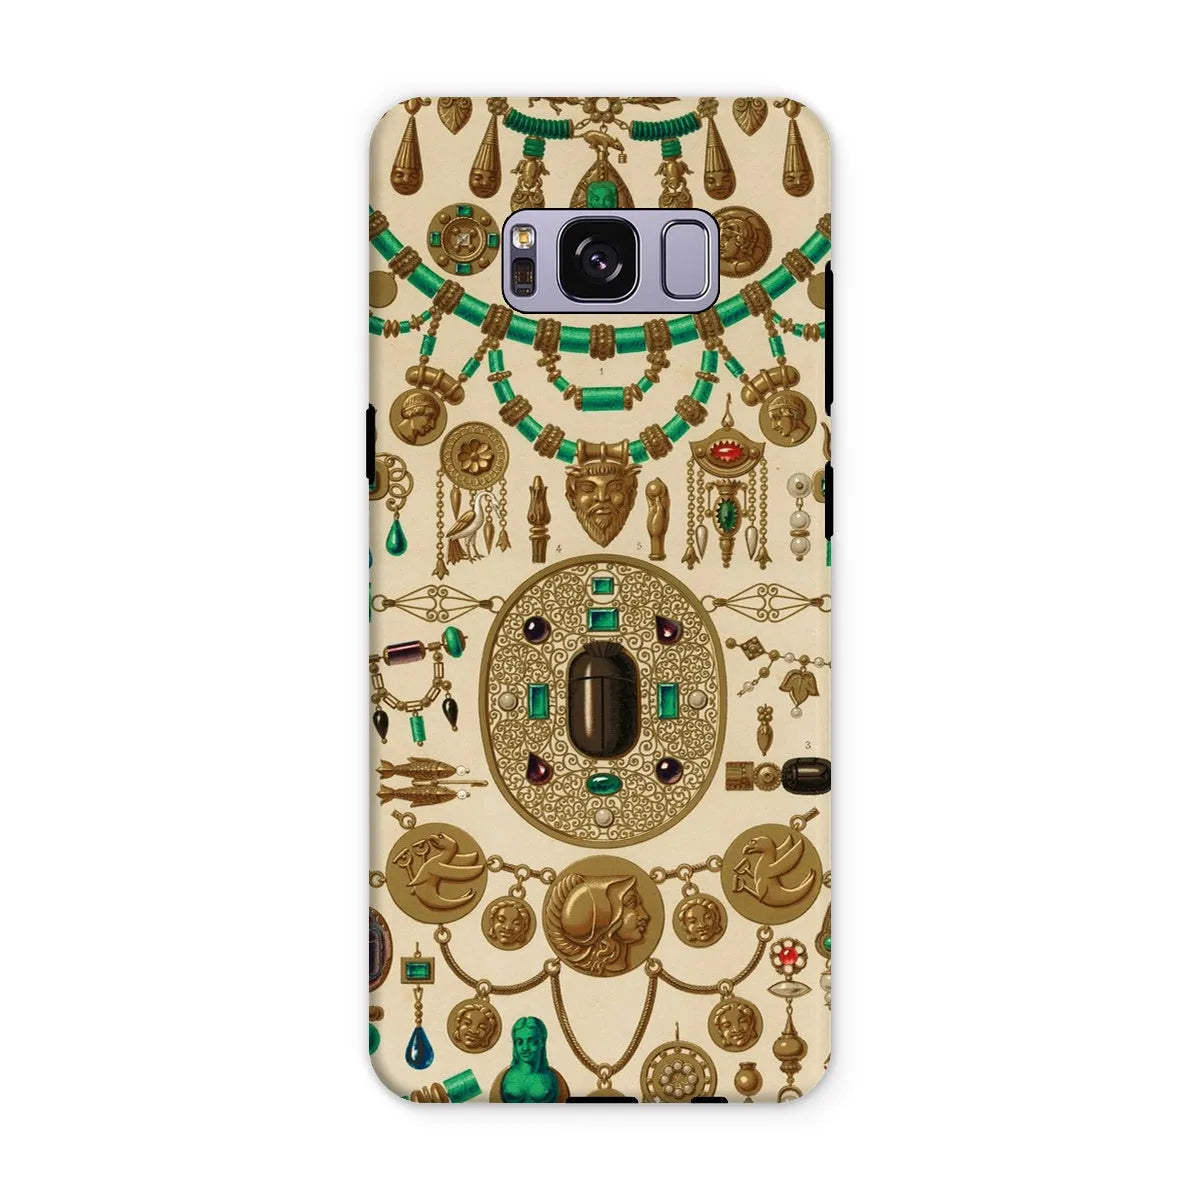 Etruscan Patterns From L’ornement Polychrome By Auguste Racinet Tough Phone Case - Samsung Galaxy S8 Plus / Matte